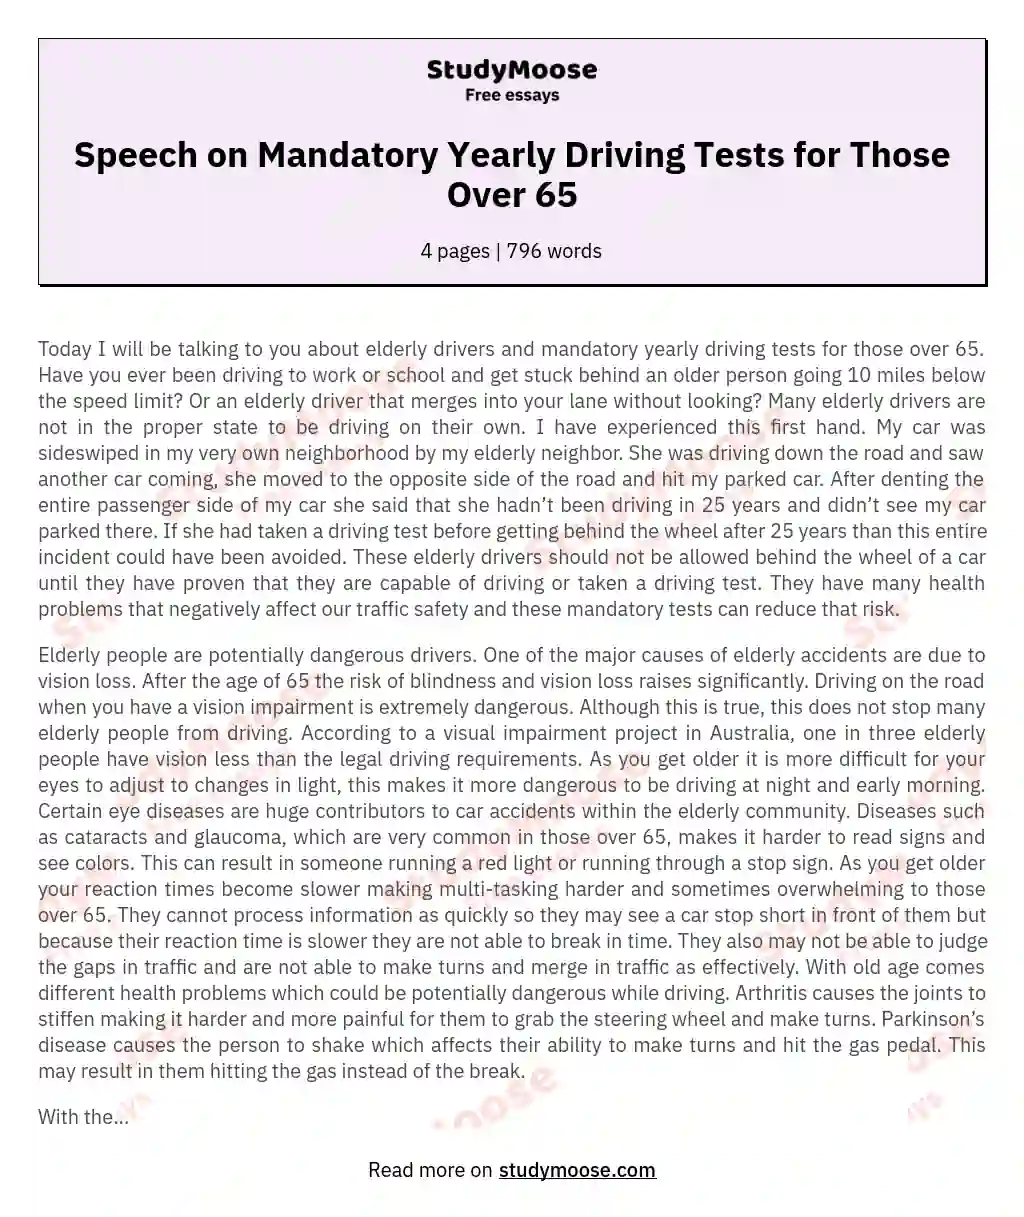 Speech on Mandatory Yearly Driving Tests for Those Over 65